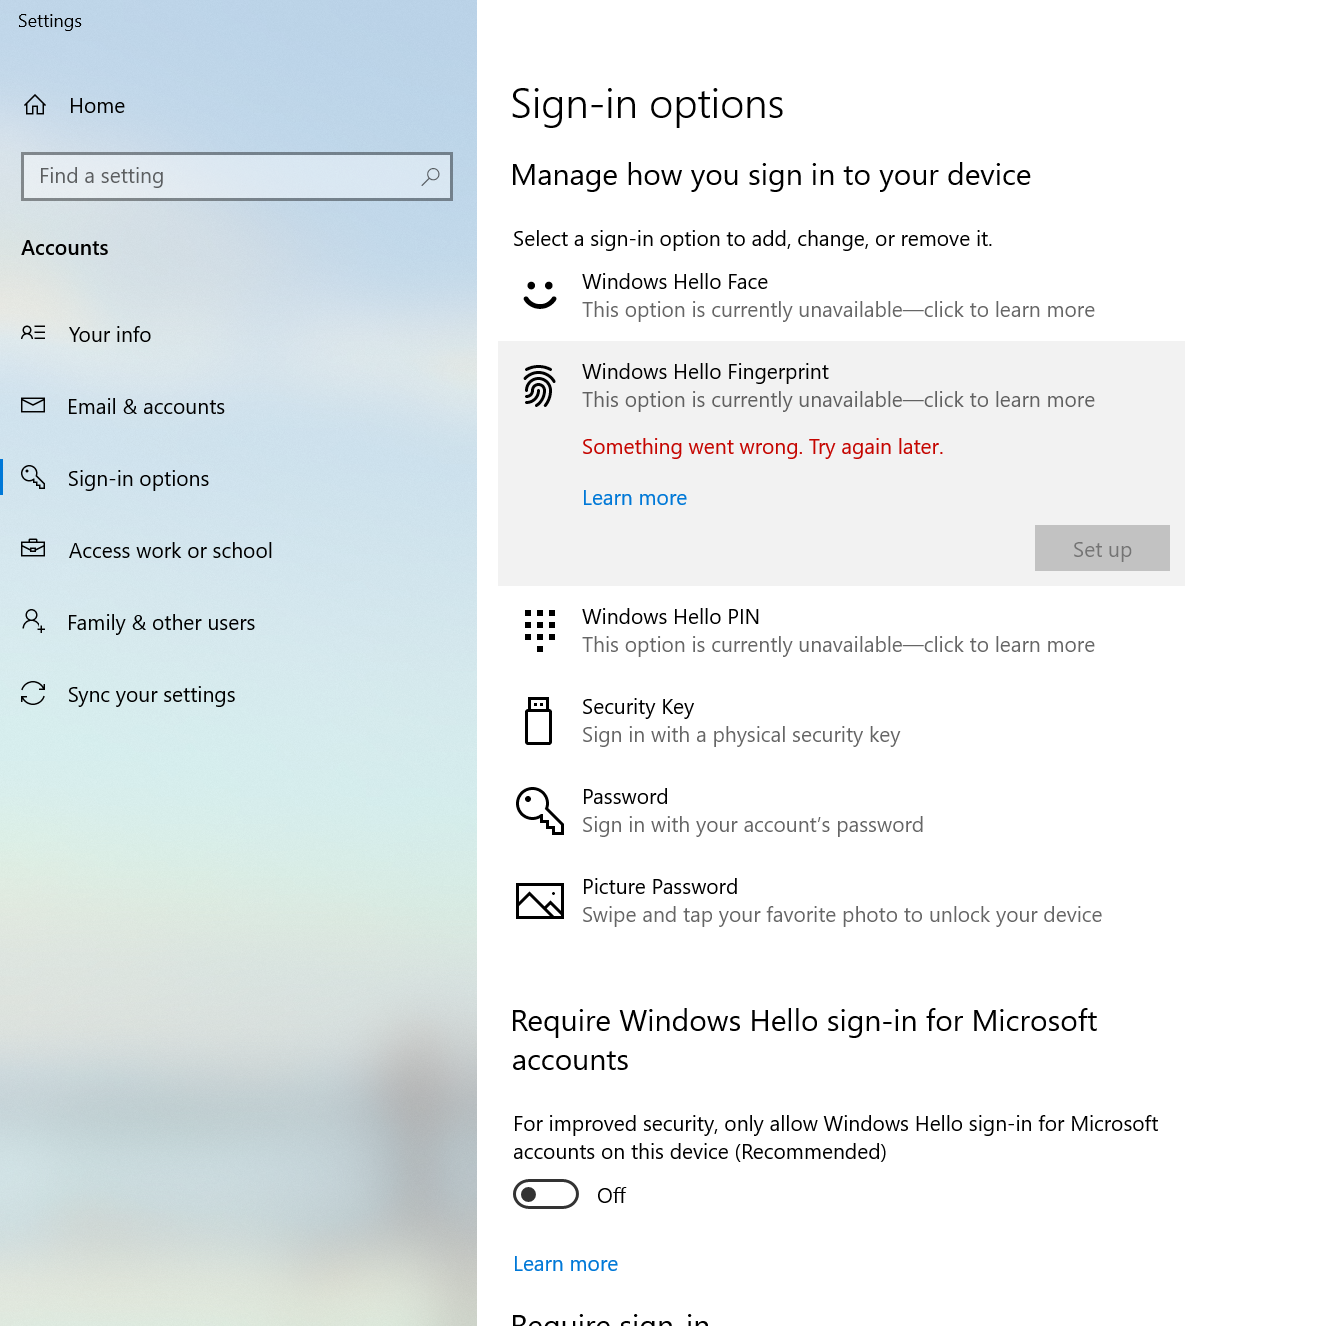 Windows hello face shows "this option is not available" e936da74-3b0f-4877-9fb4-586294b8ef72?upload=true.png